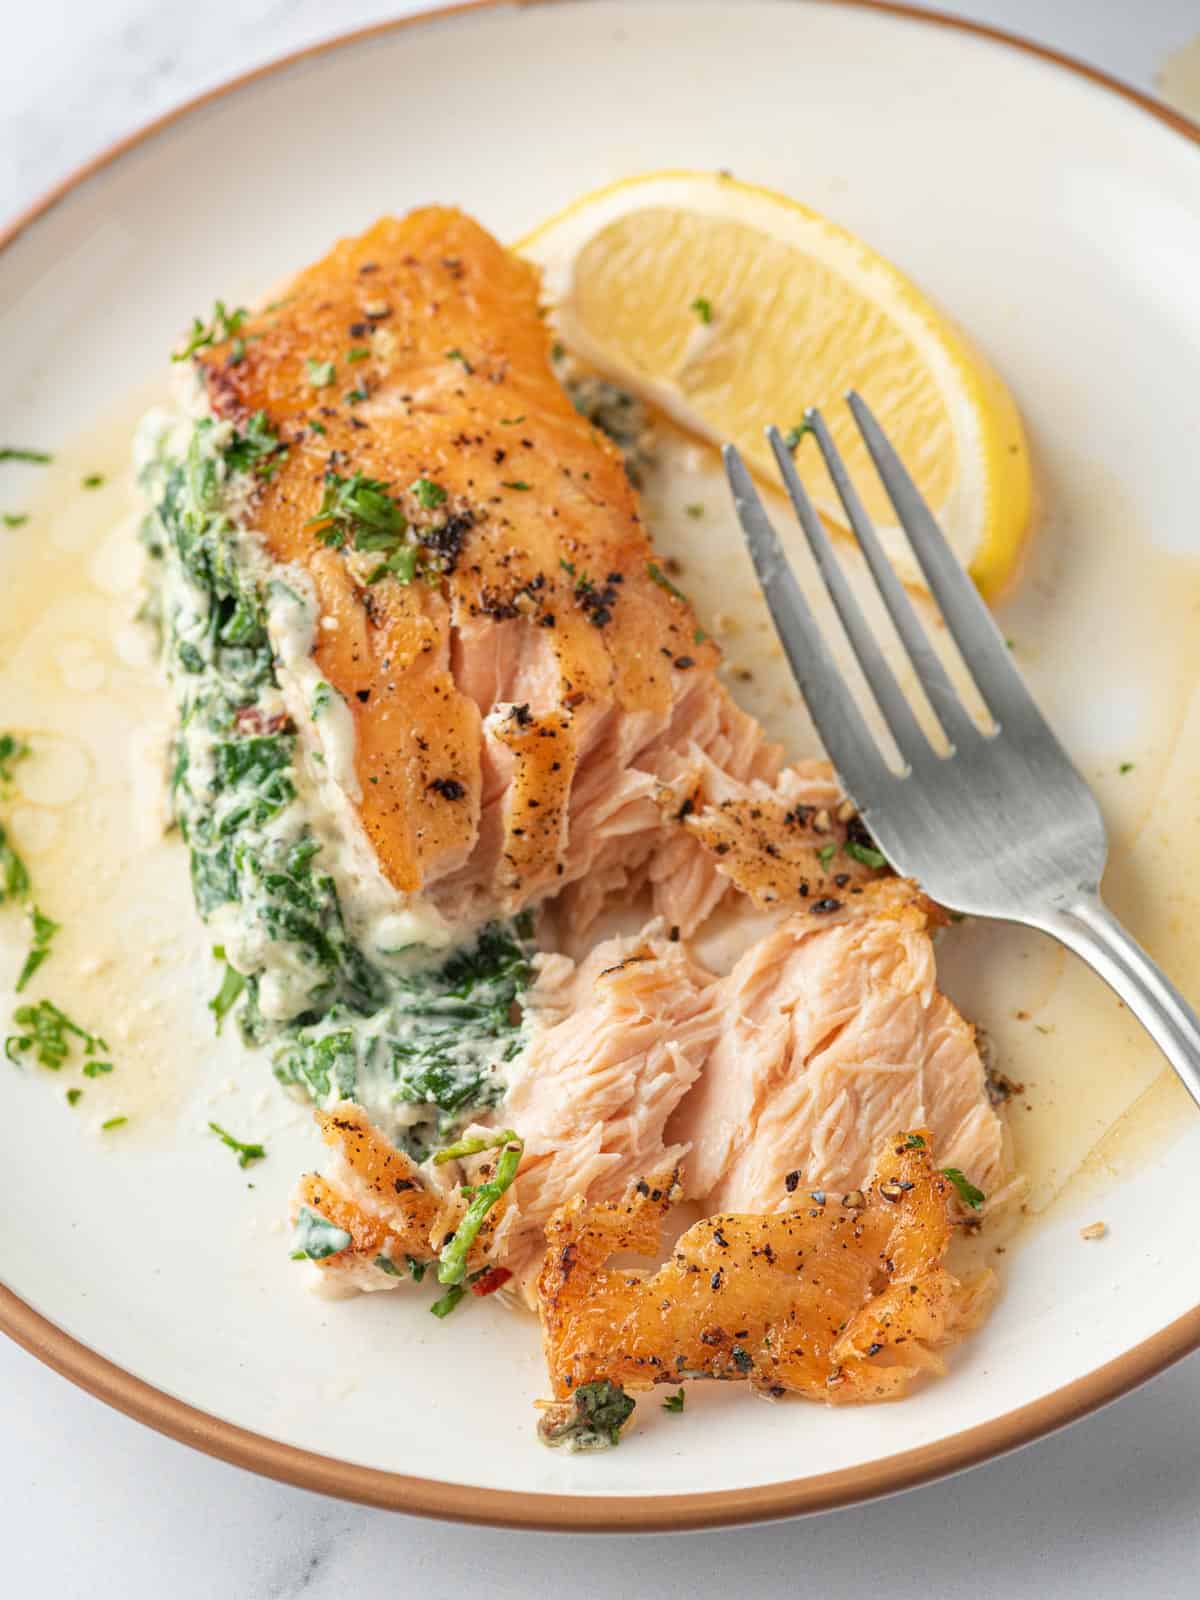 A plate of creamy stuffed spinach salmon with a part flaked opened.